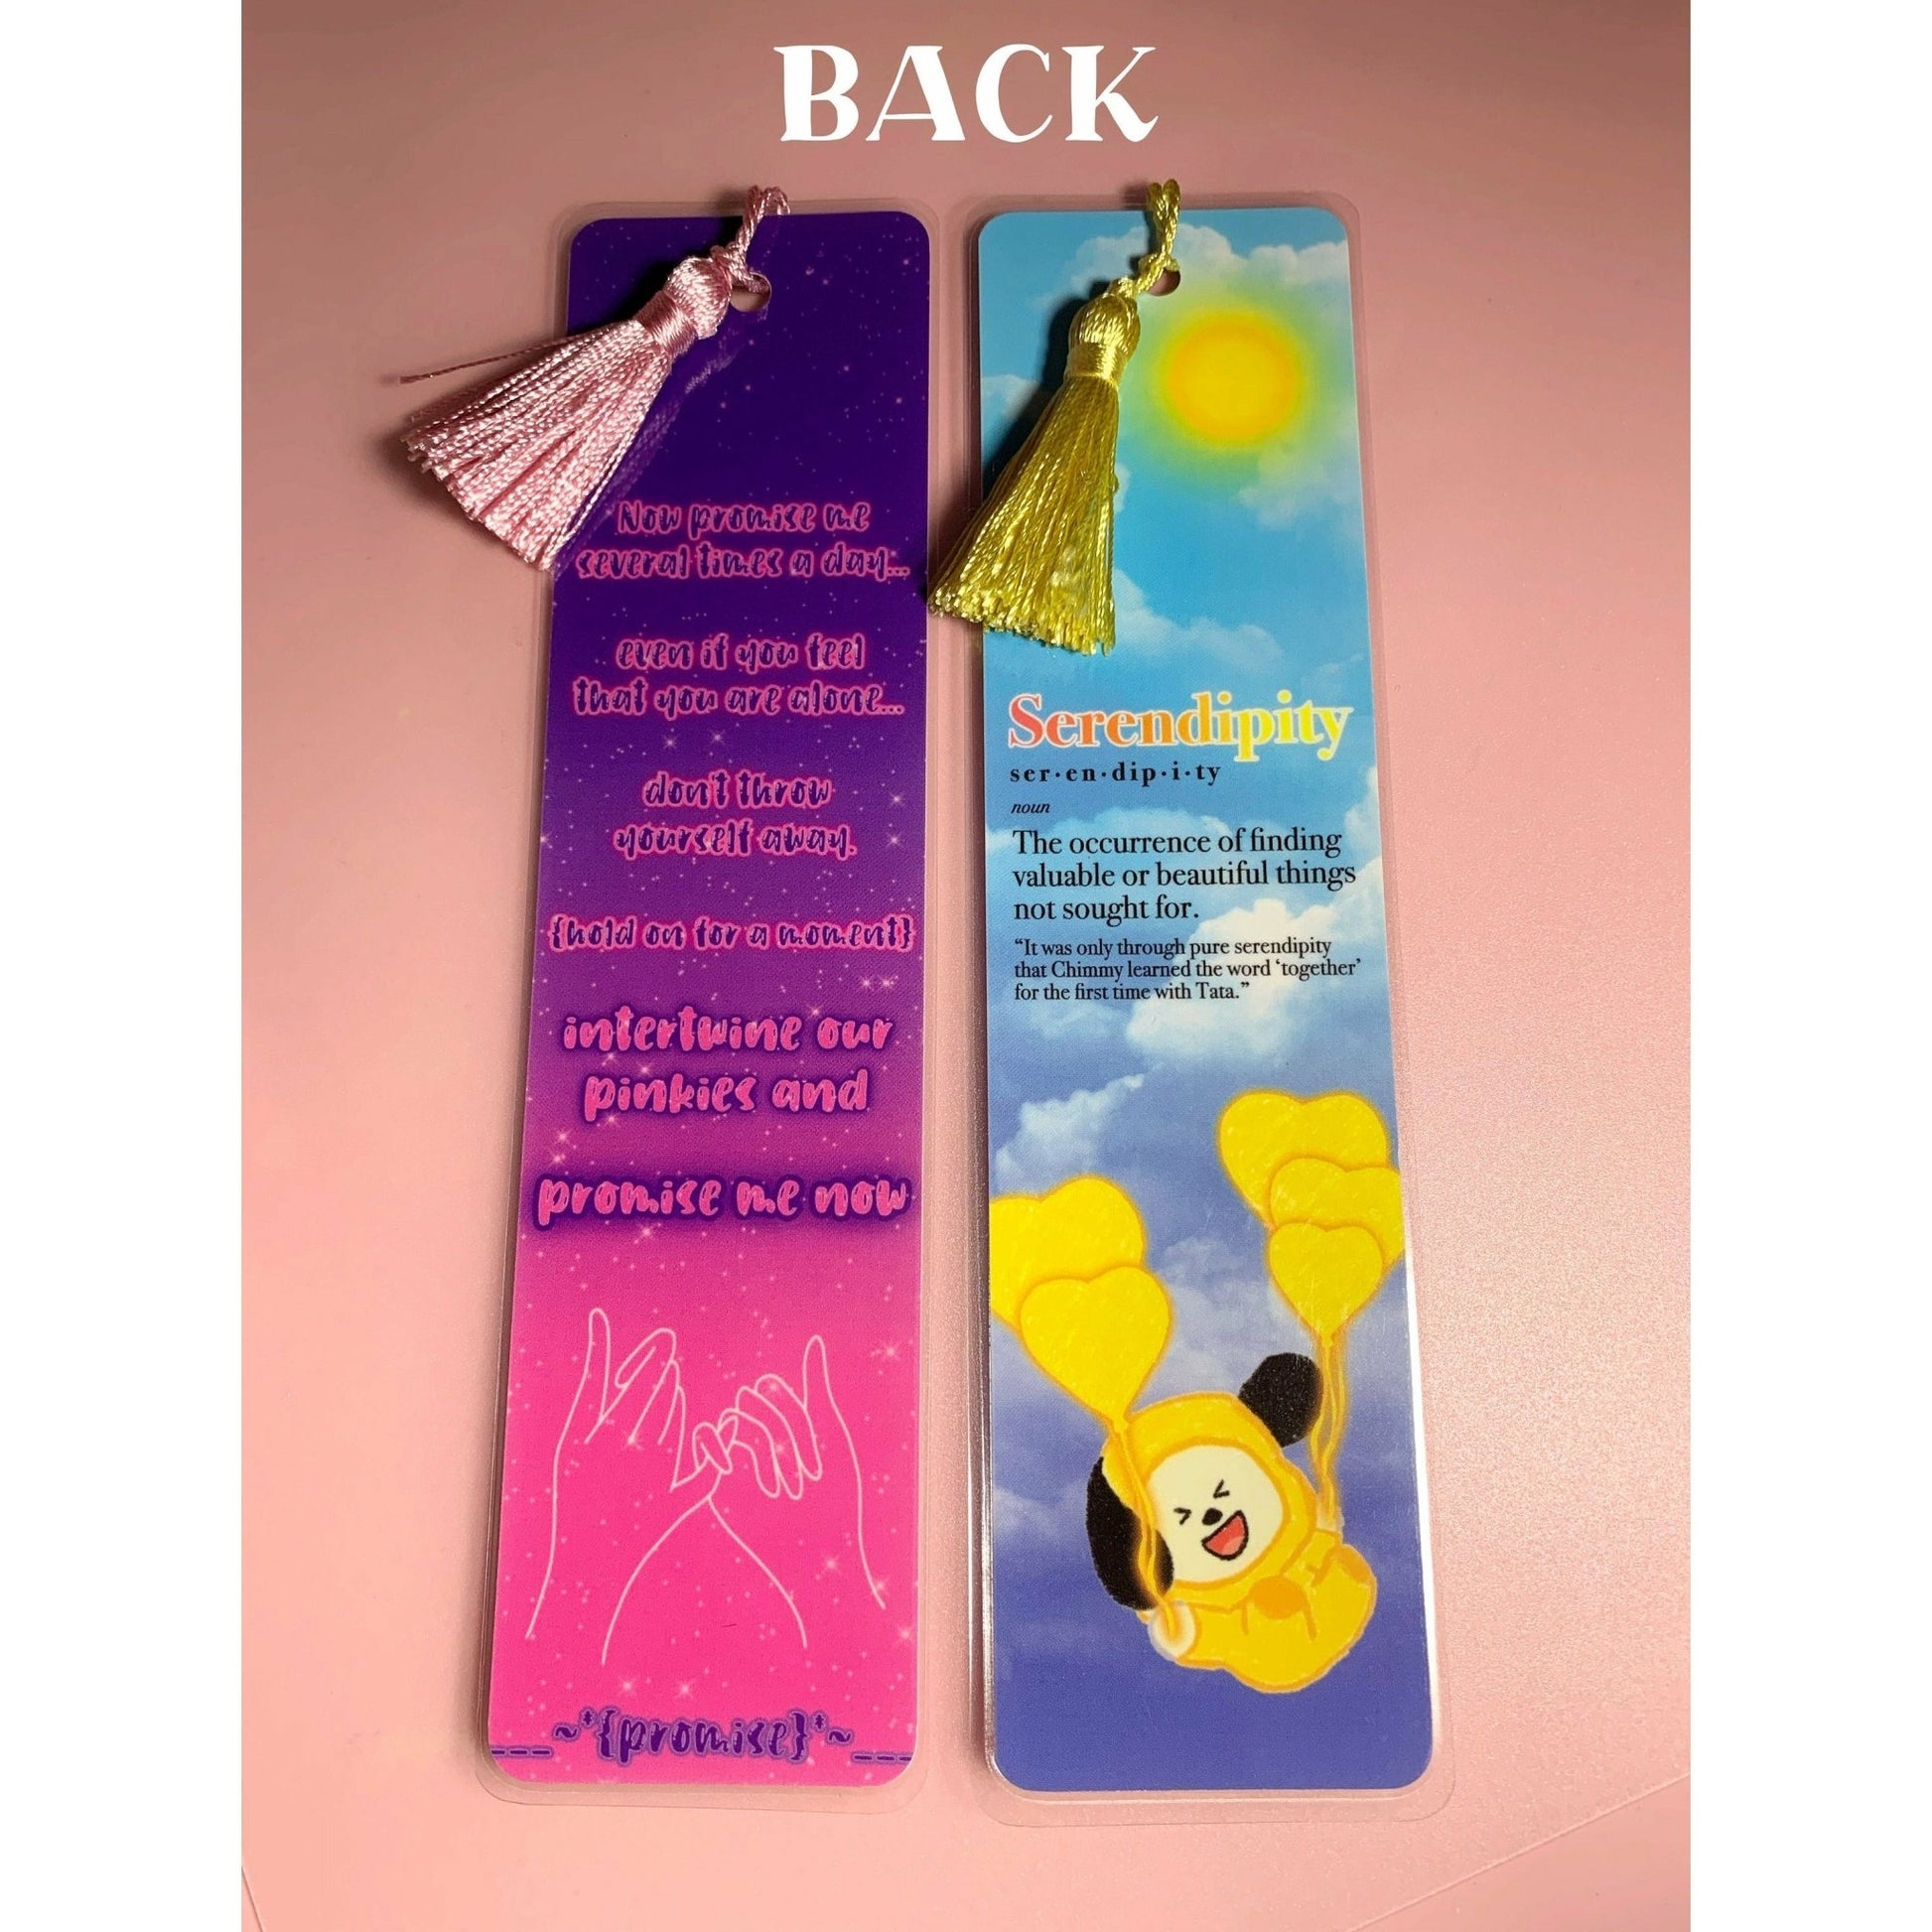 JIMIN Bookmark - MilkBunn Co. Jimin from BTS inspired bookmarks. Serendipity version and promise version. Back view.